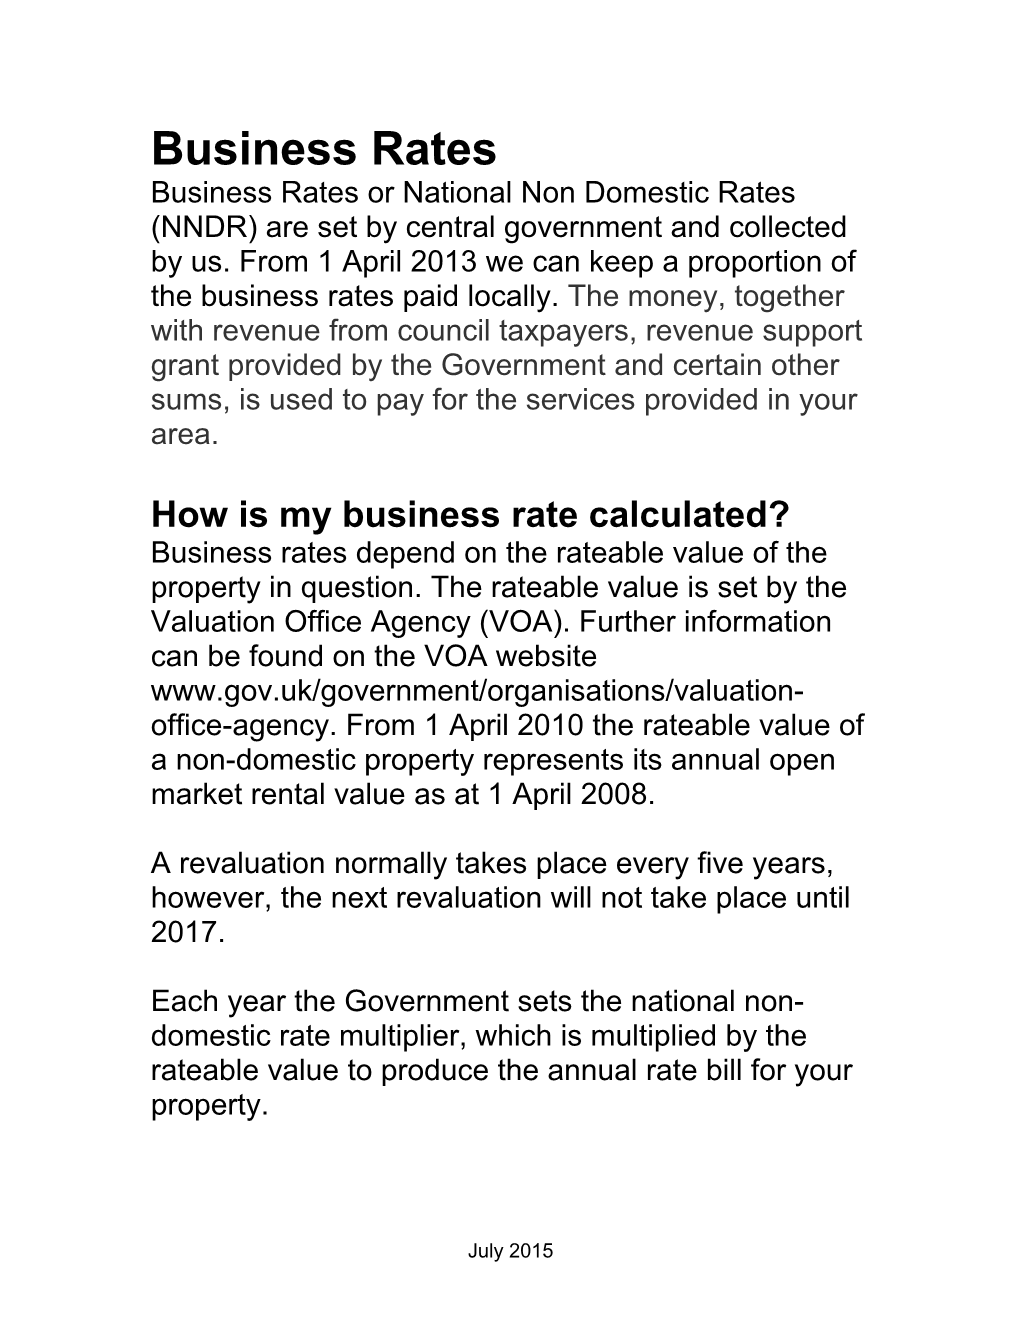 How Is My Business Rate Calculated?